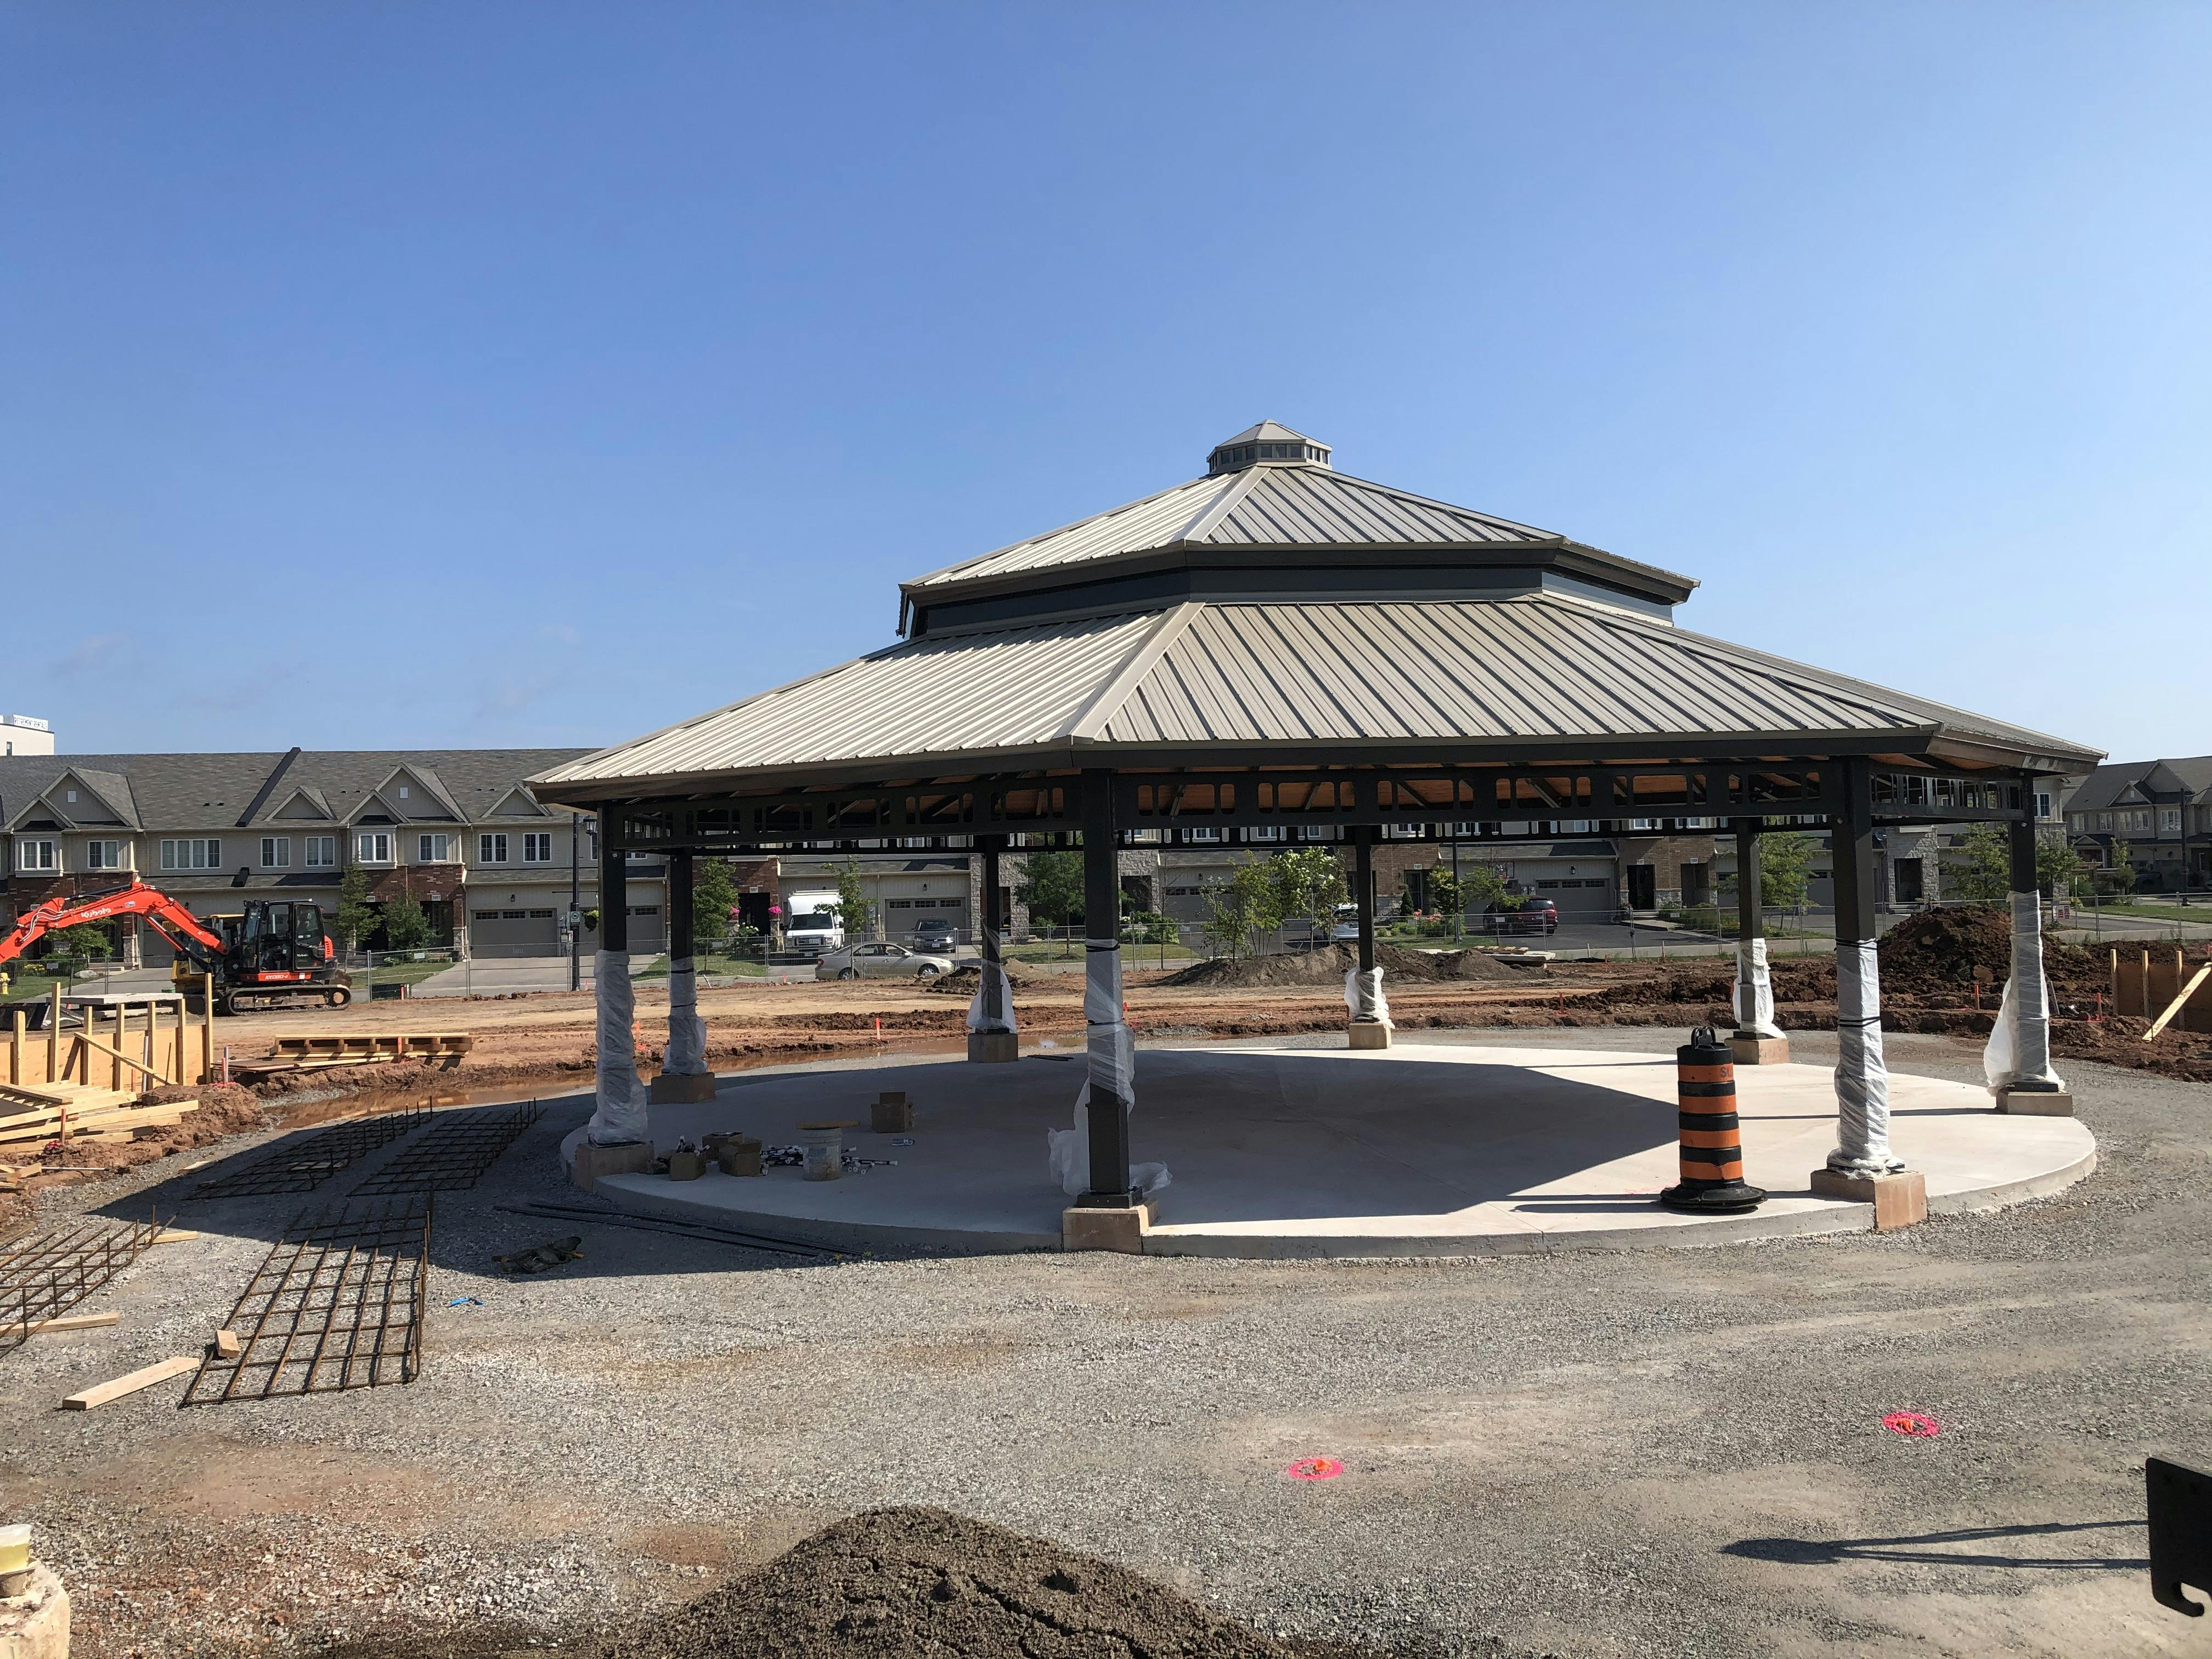 Main Shade Structure